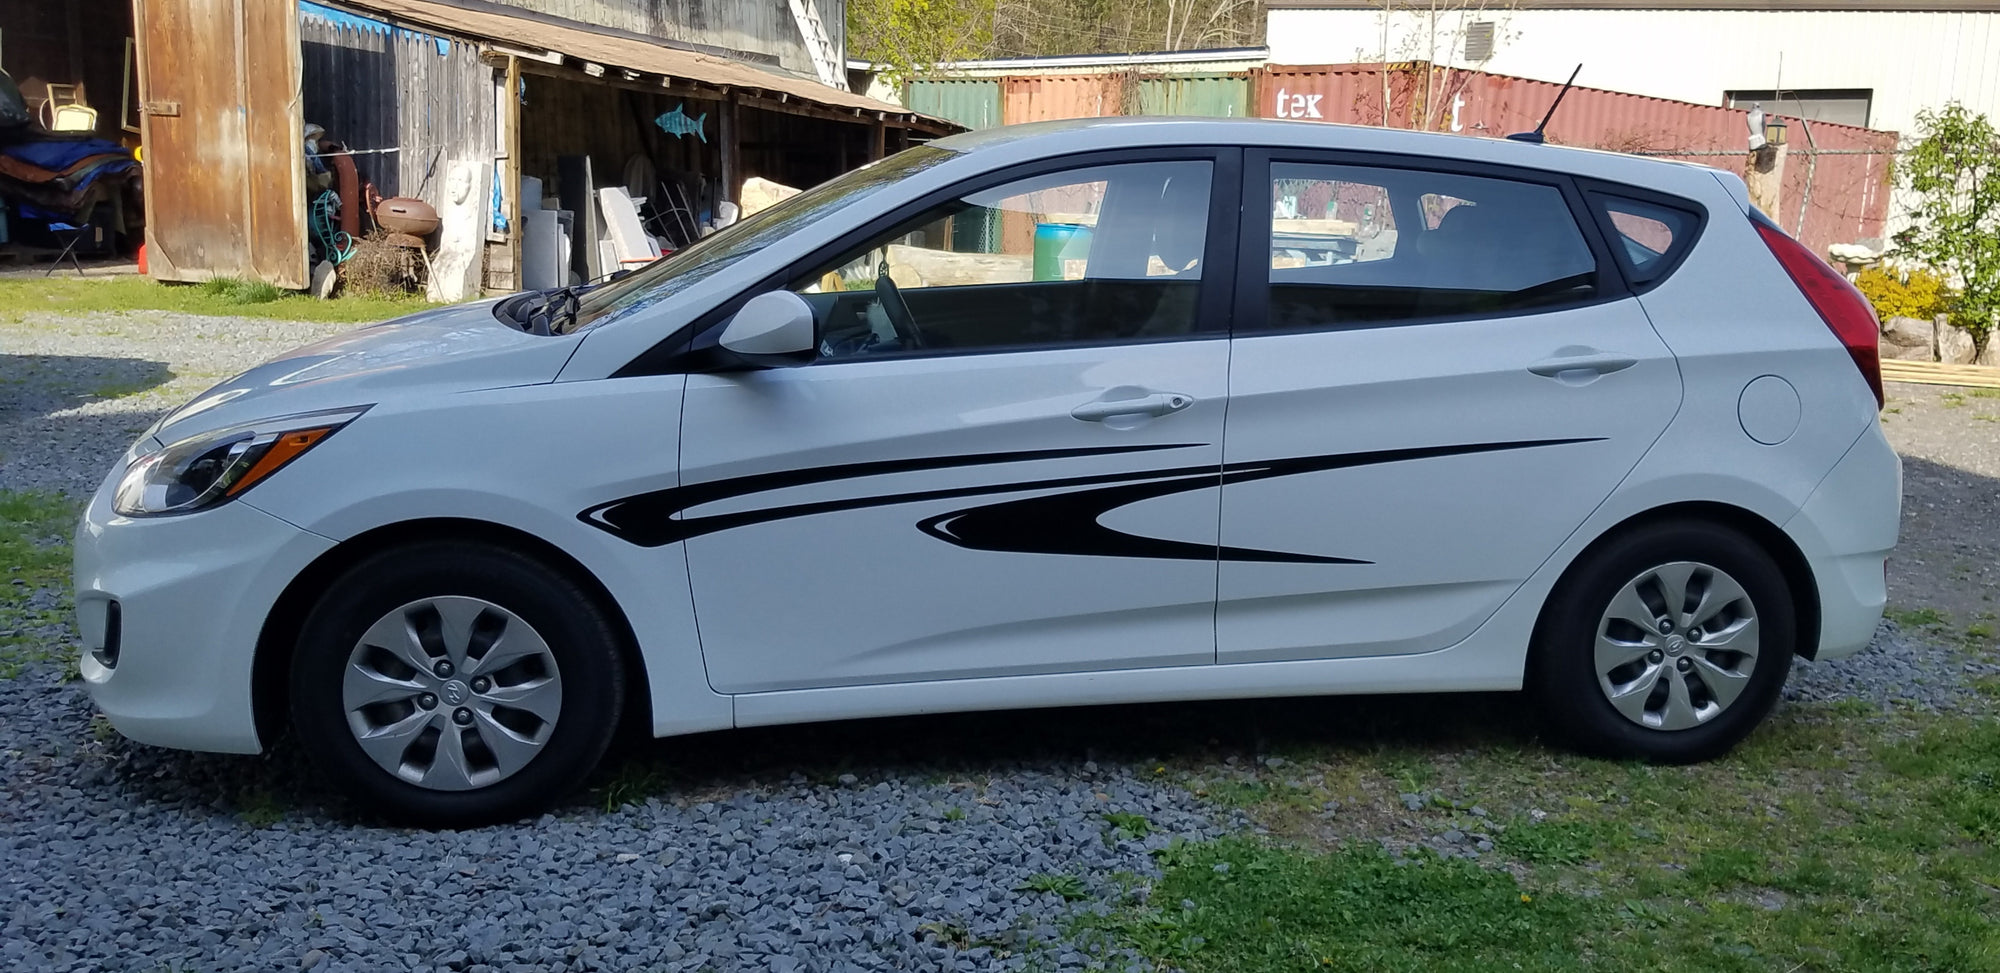 Black vinyl graphic stripes on the side of a small white hatchback car